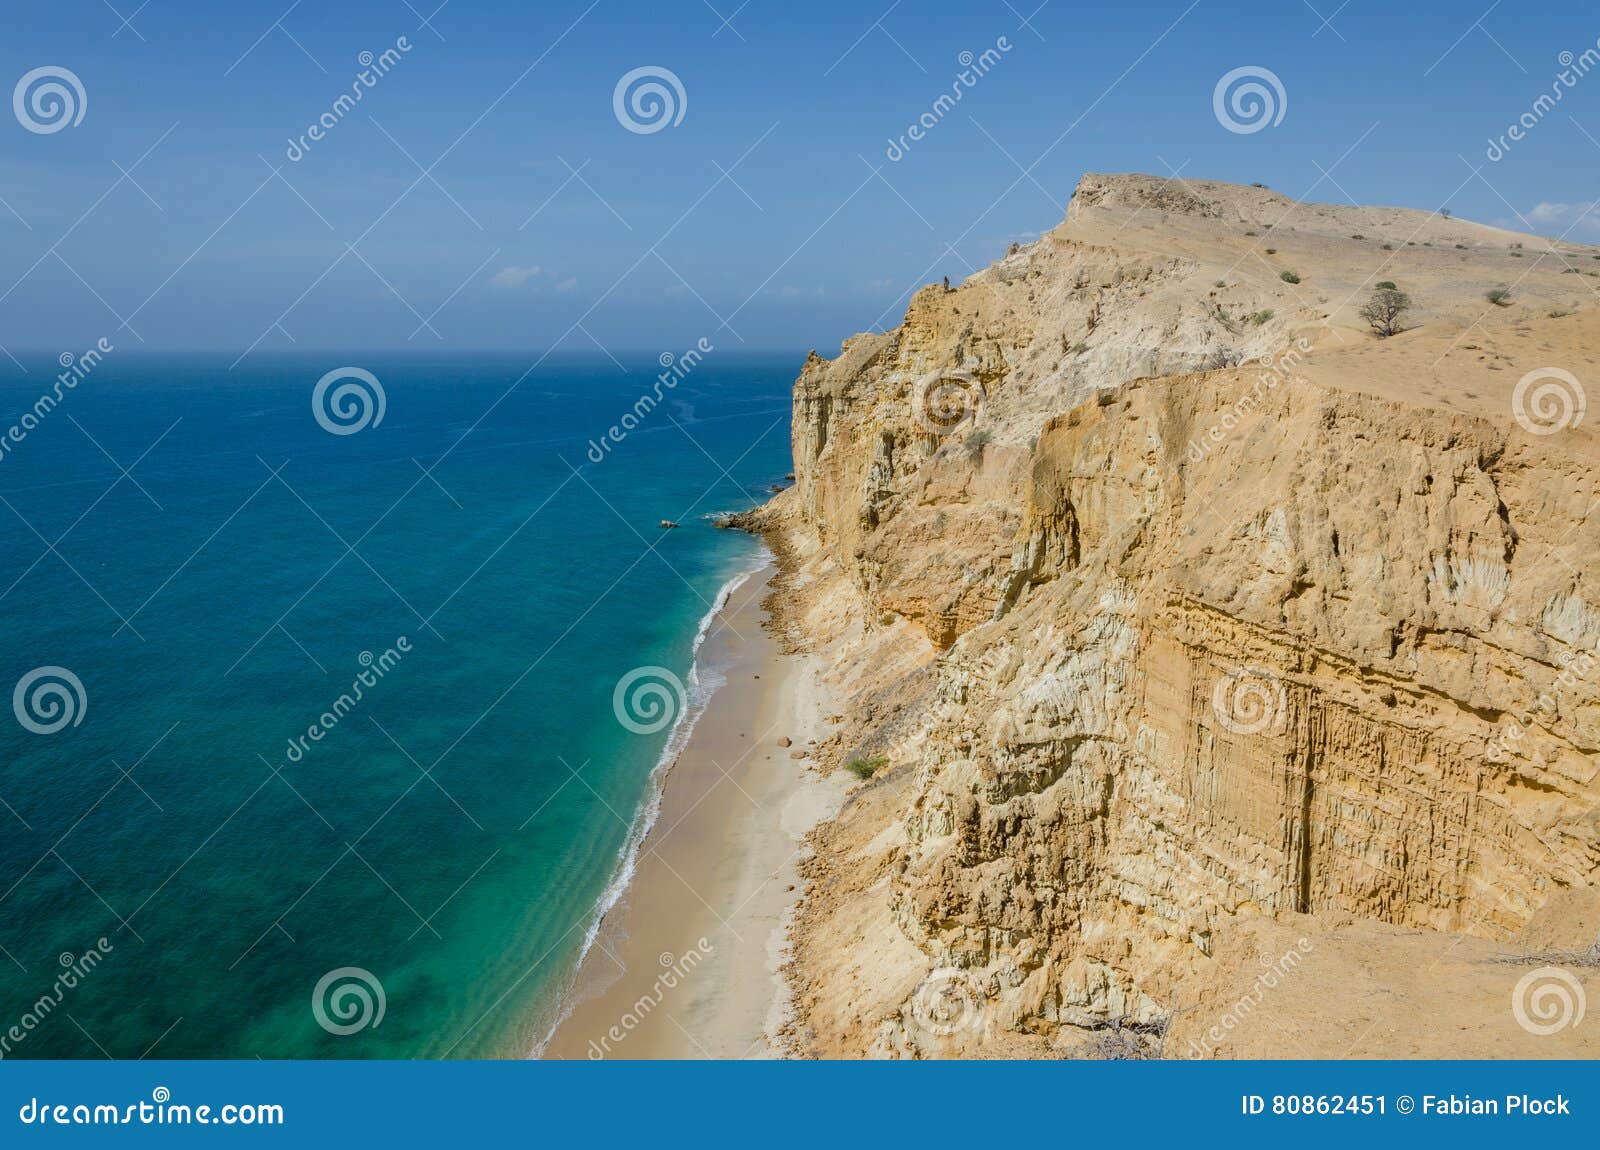 impressive cliffs with turquoise ocean at the coast at caotinha, angola